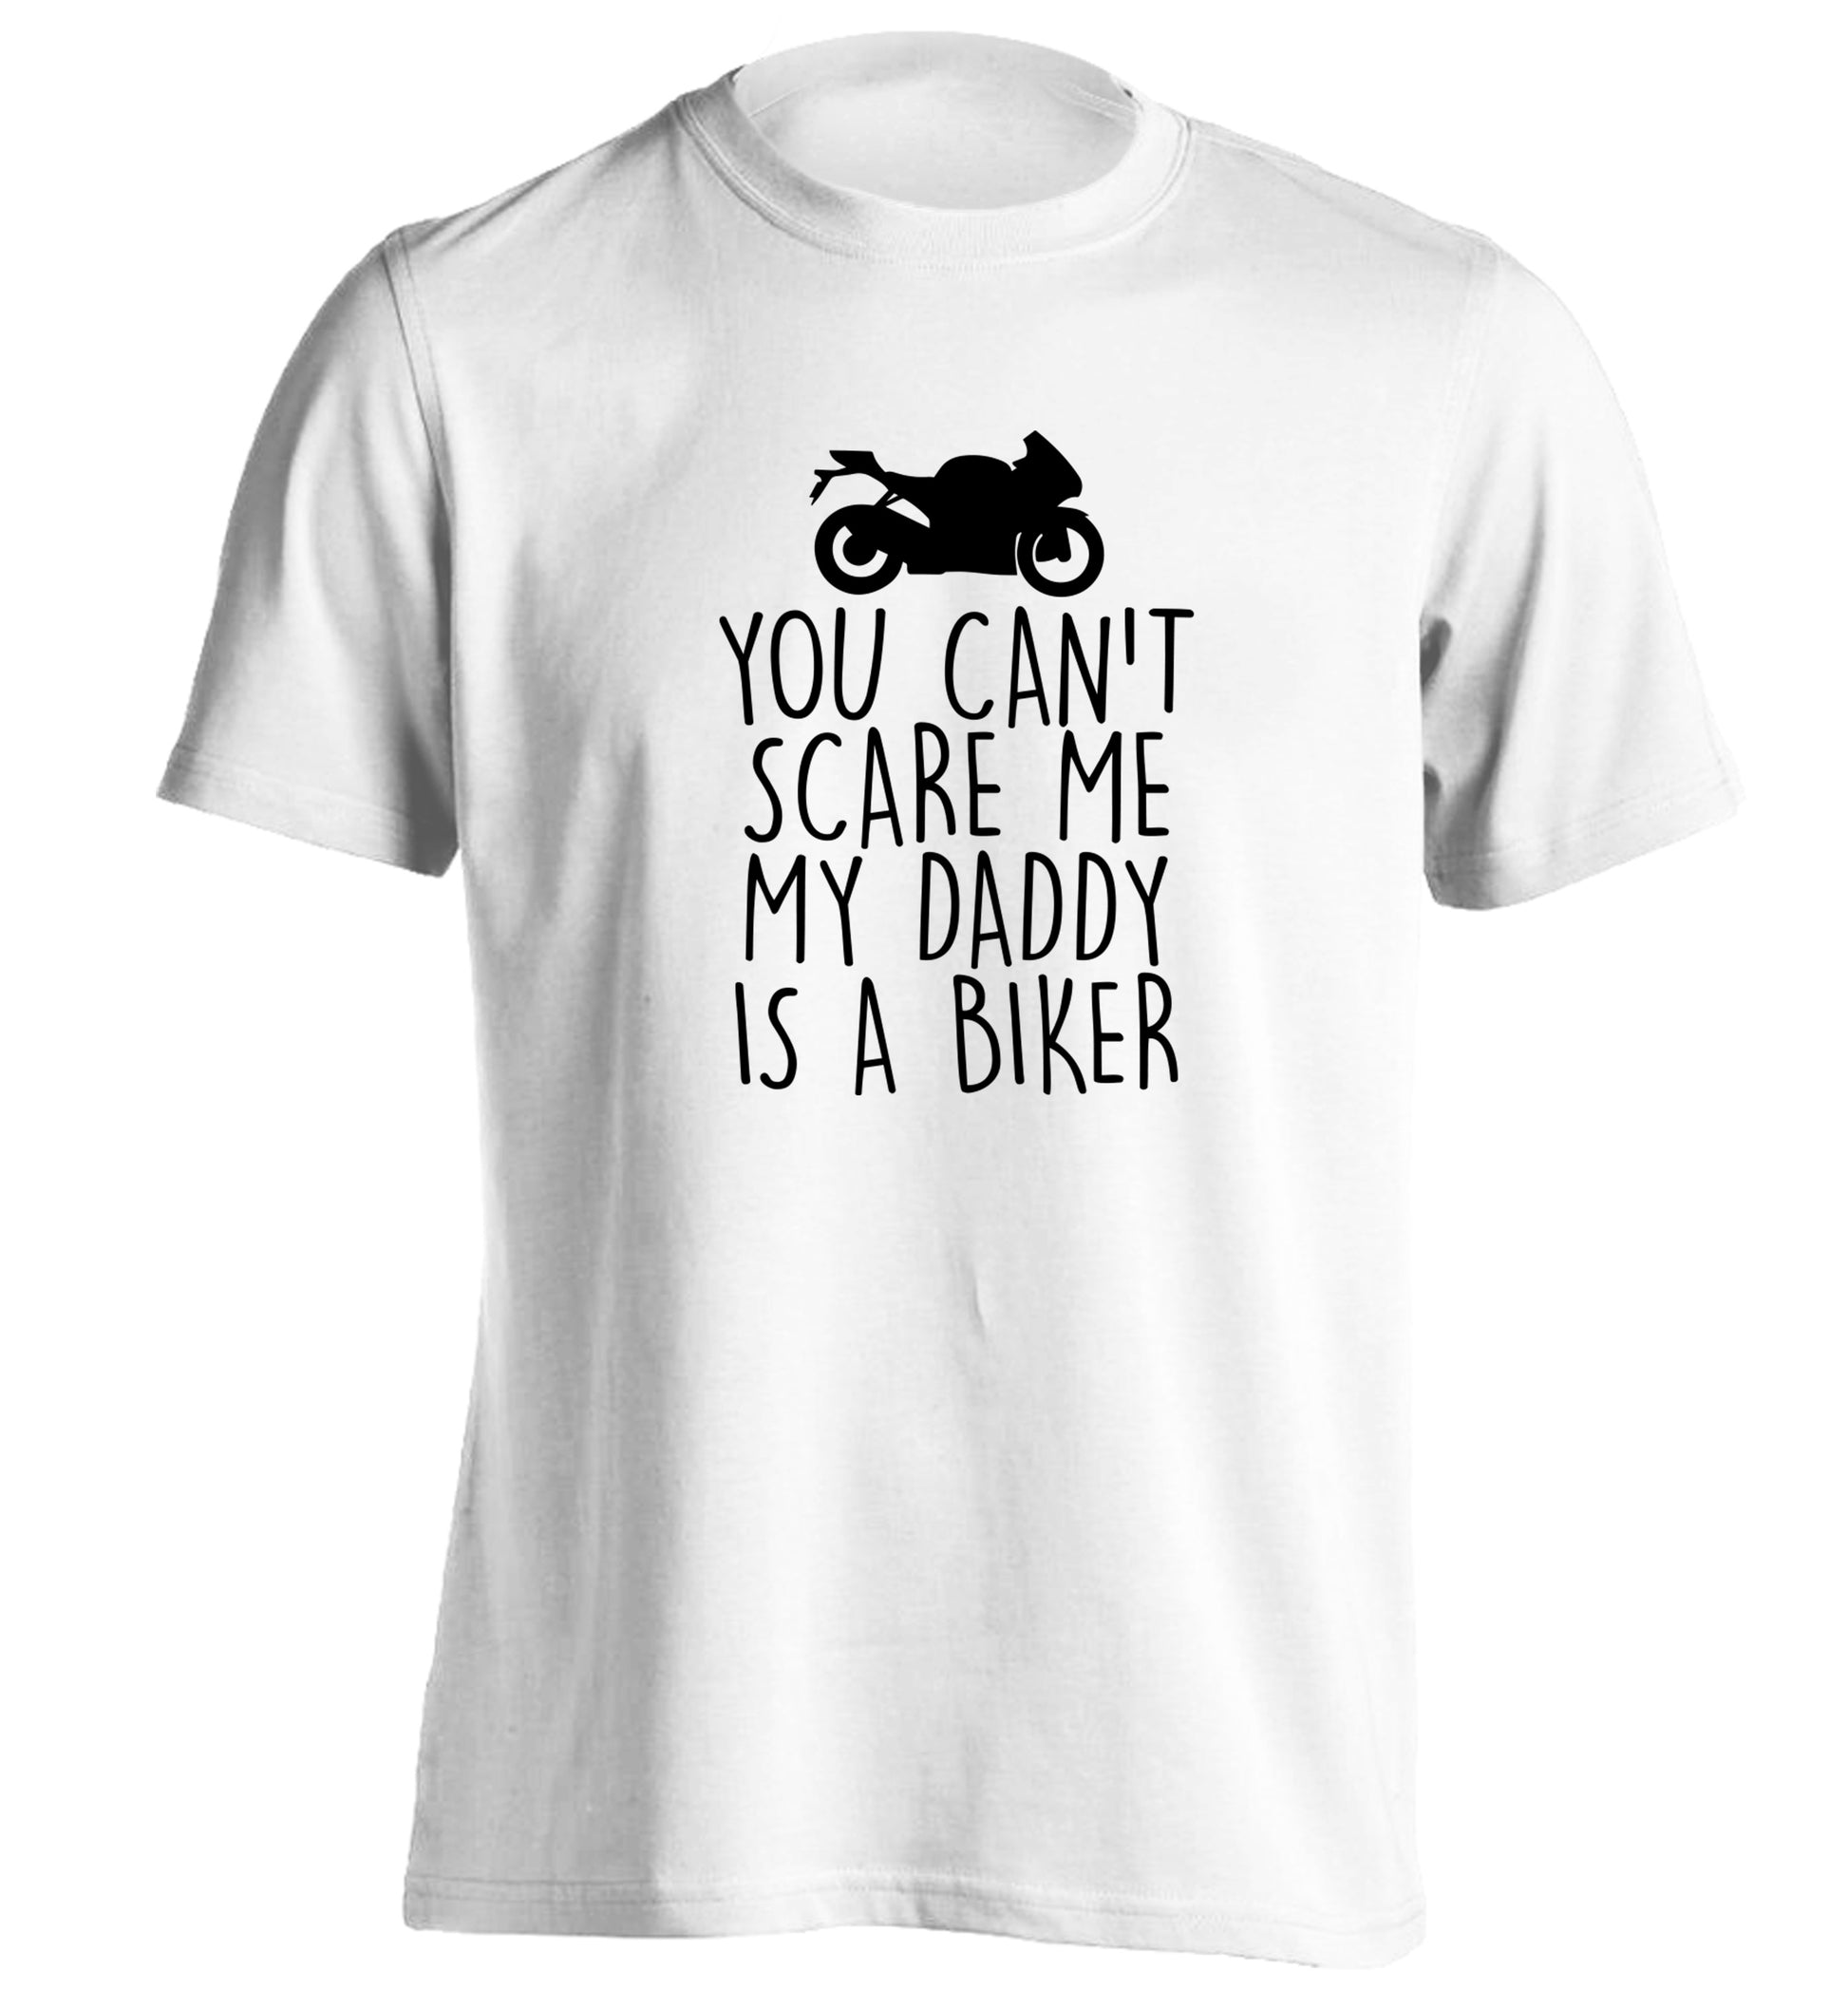 You can't scare me my daddy is a biker adults unisex white Tshirt 2XL